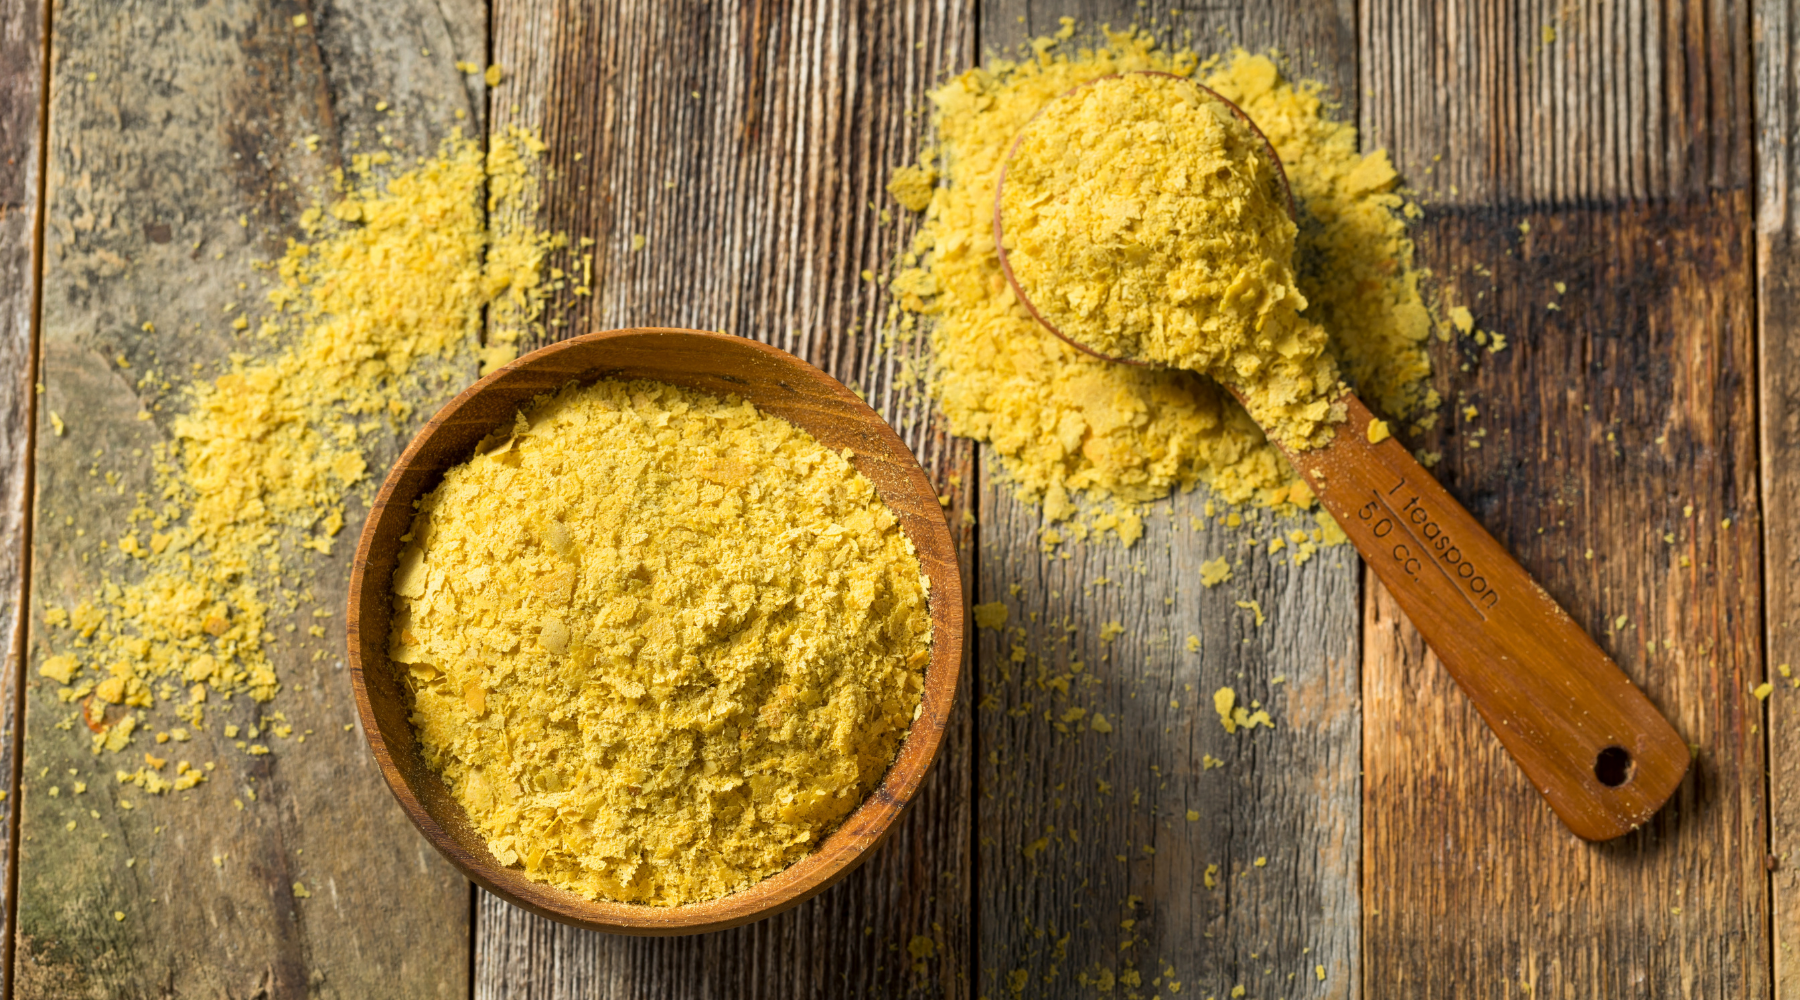 8 WAYS TO USE NUTRITIONAL YEAST